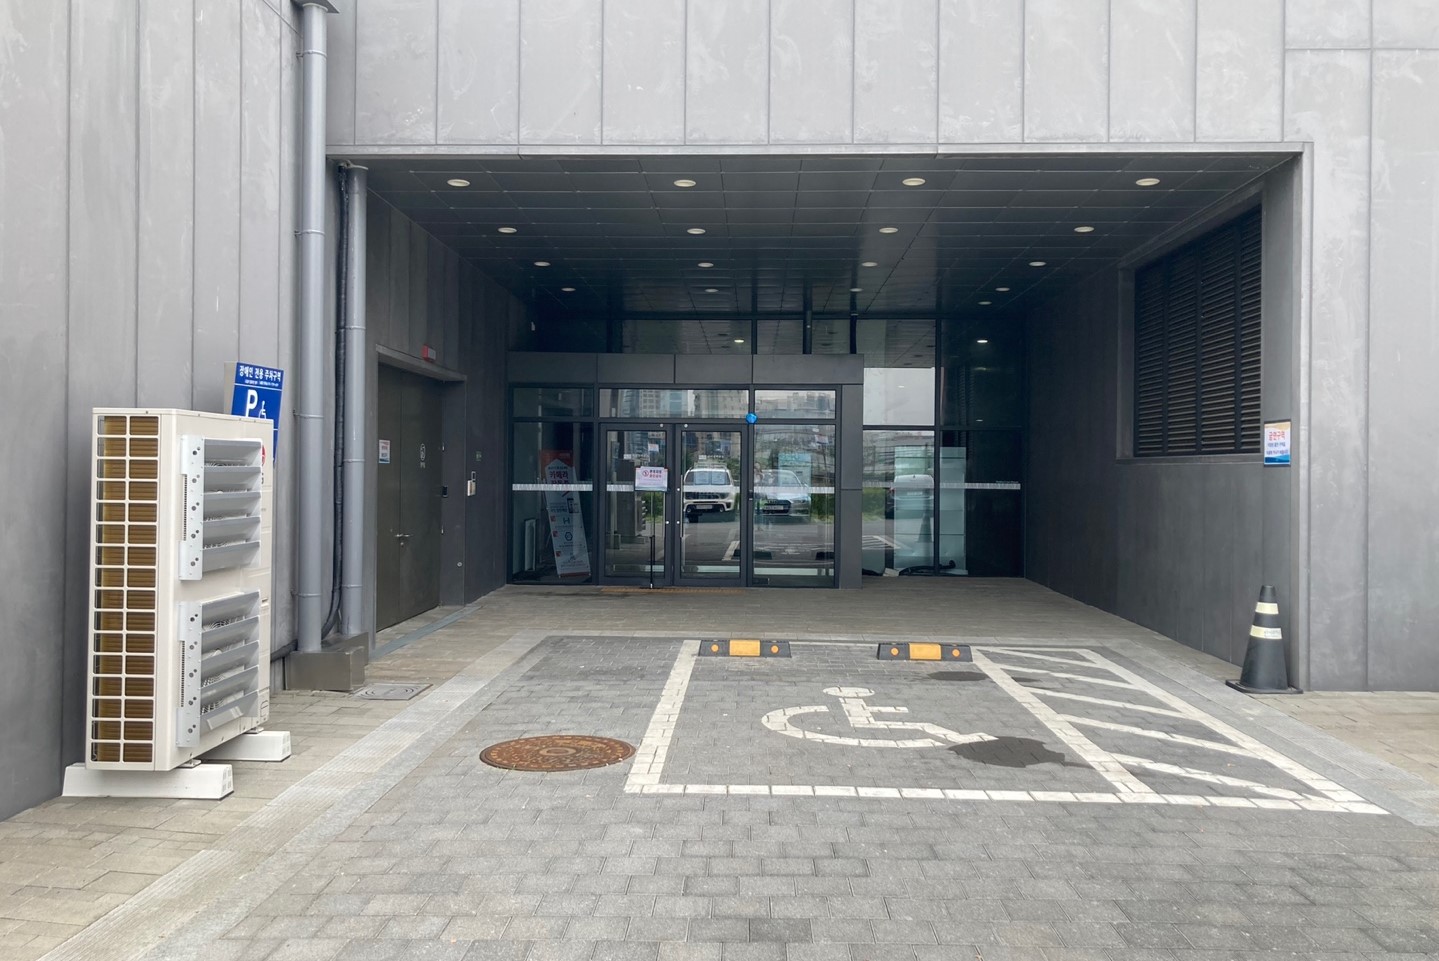 Parking facilities for persons with disabilities0 : Parking facilities for persons with disabilities users